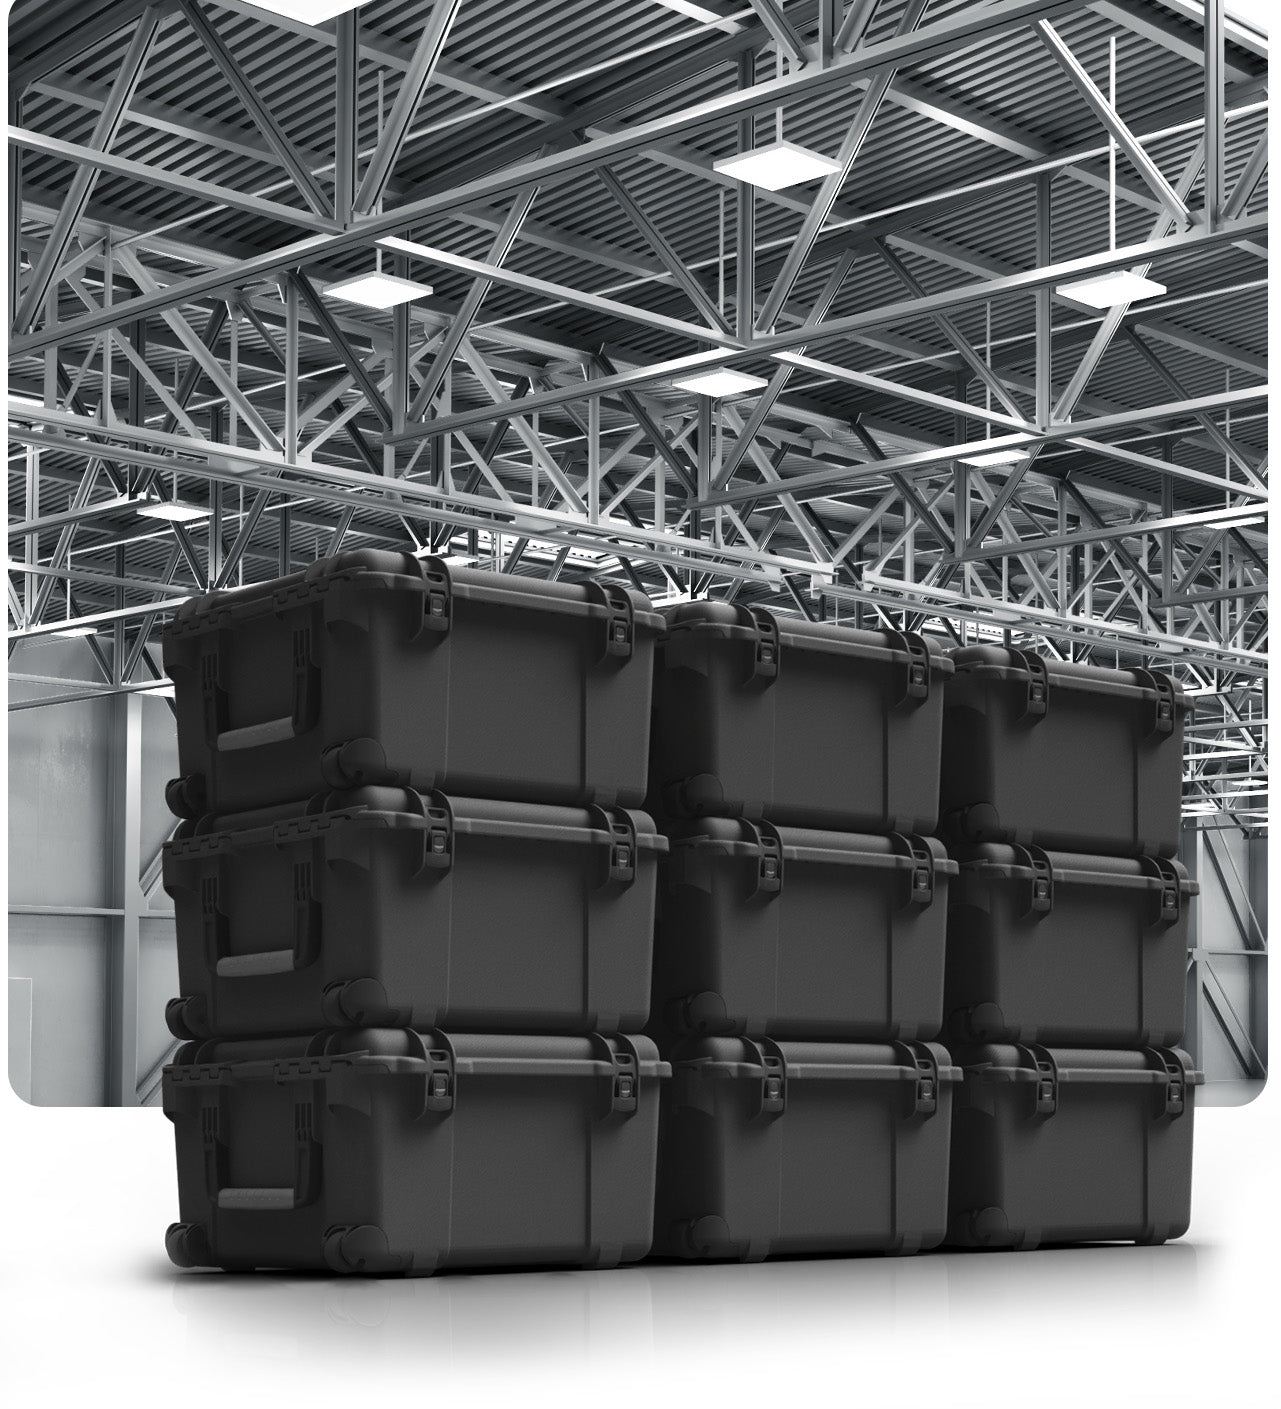 NANUK's Integrated interlocking feature enhances logistics efficiency by enabling secure, space-saving stacking of cases. It ensures stable, risk-free transport of sensitive equipment, reducing transportation costs and improving operational efficiency.